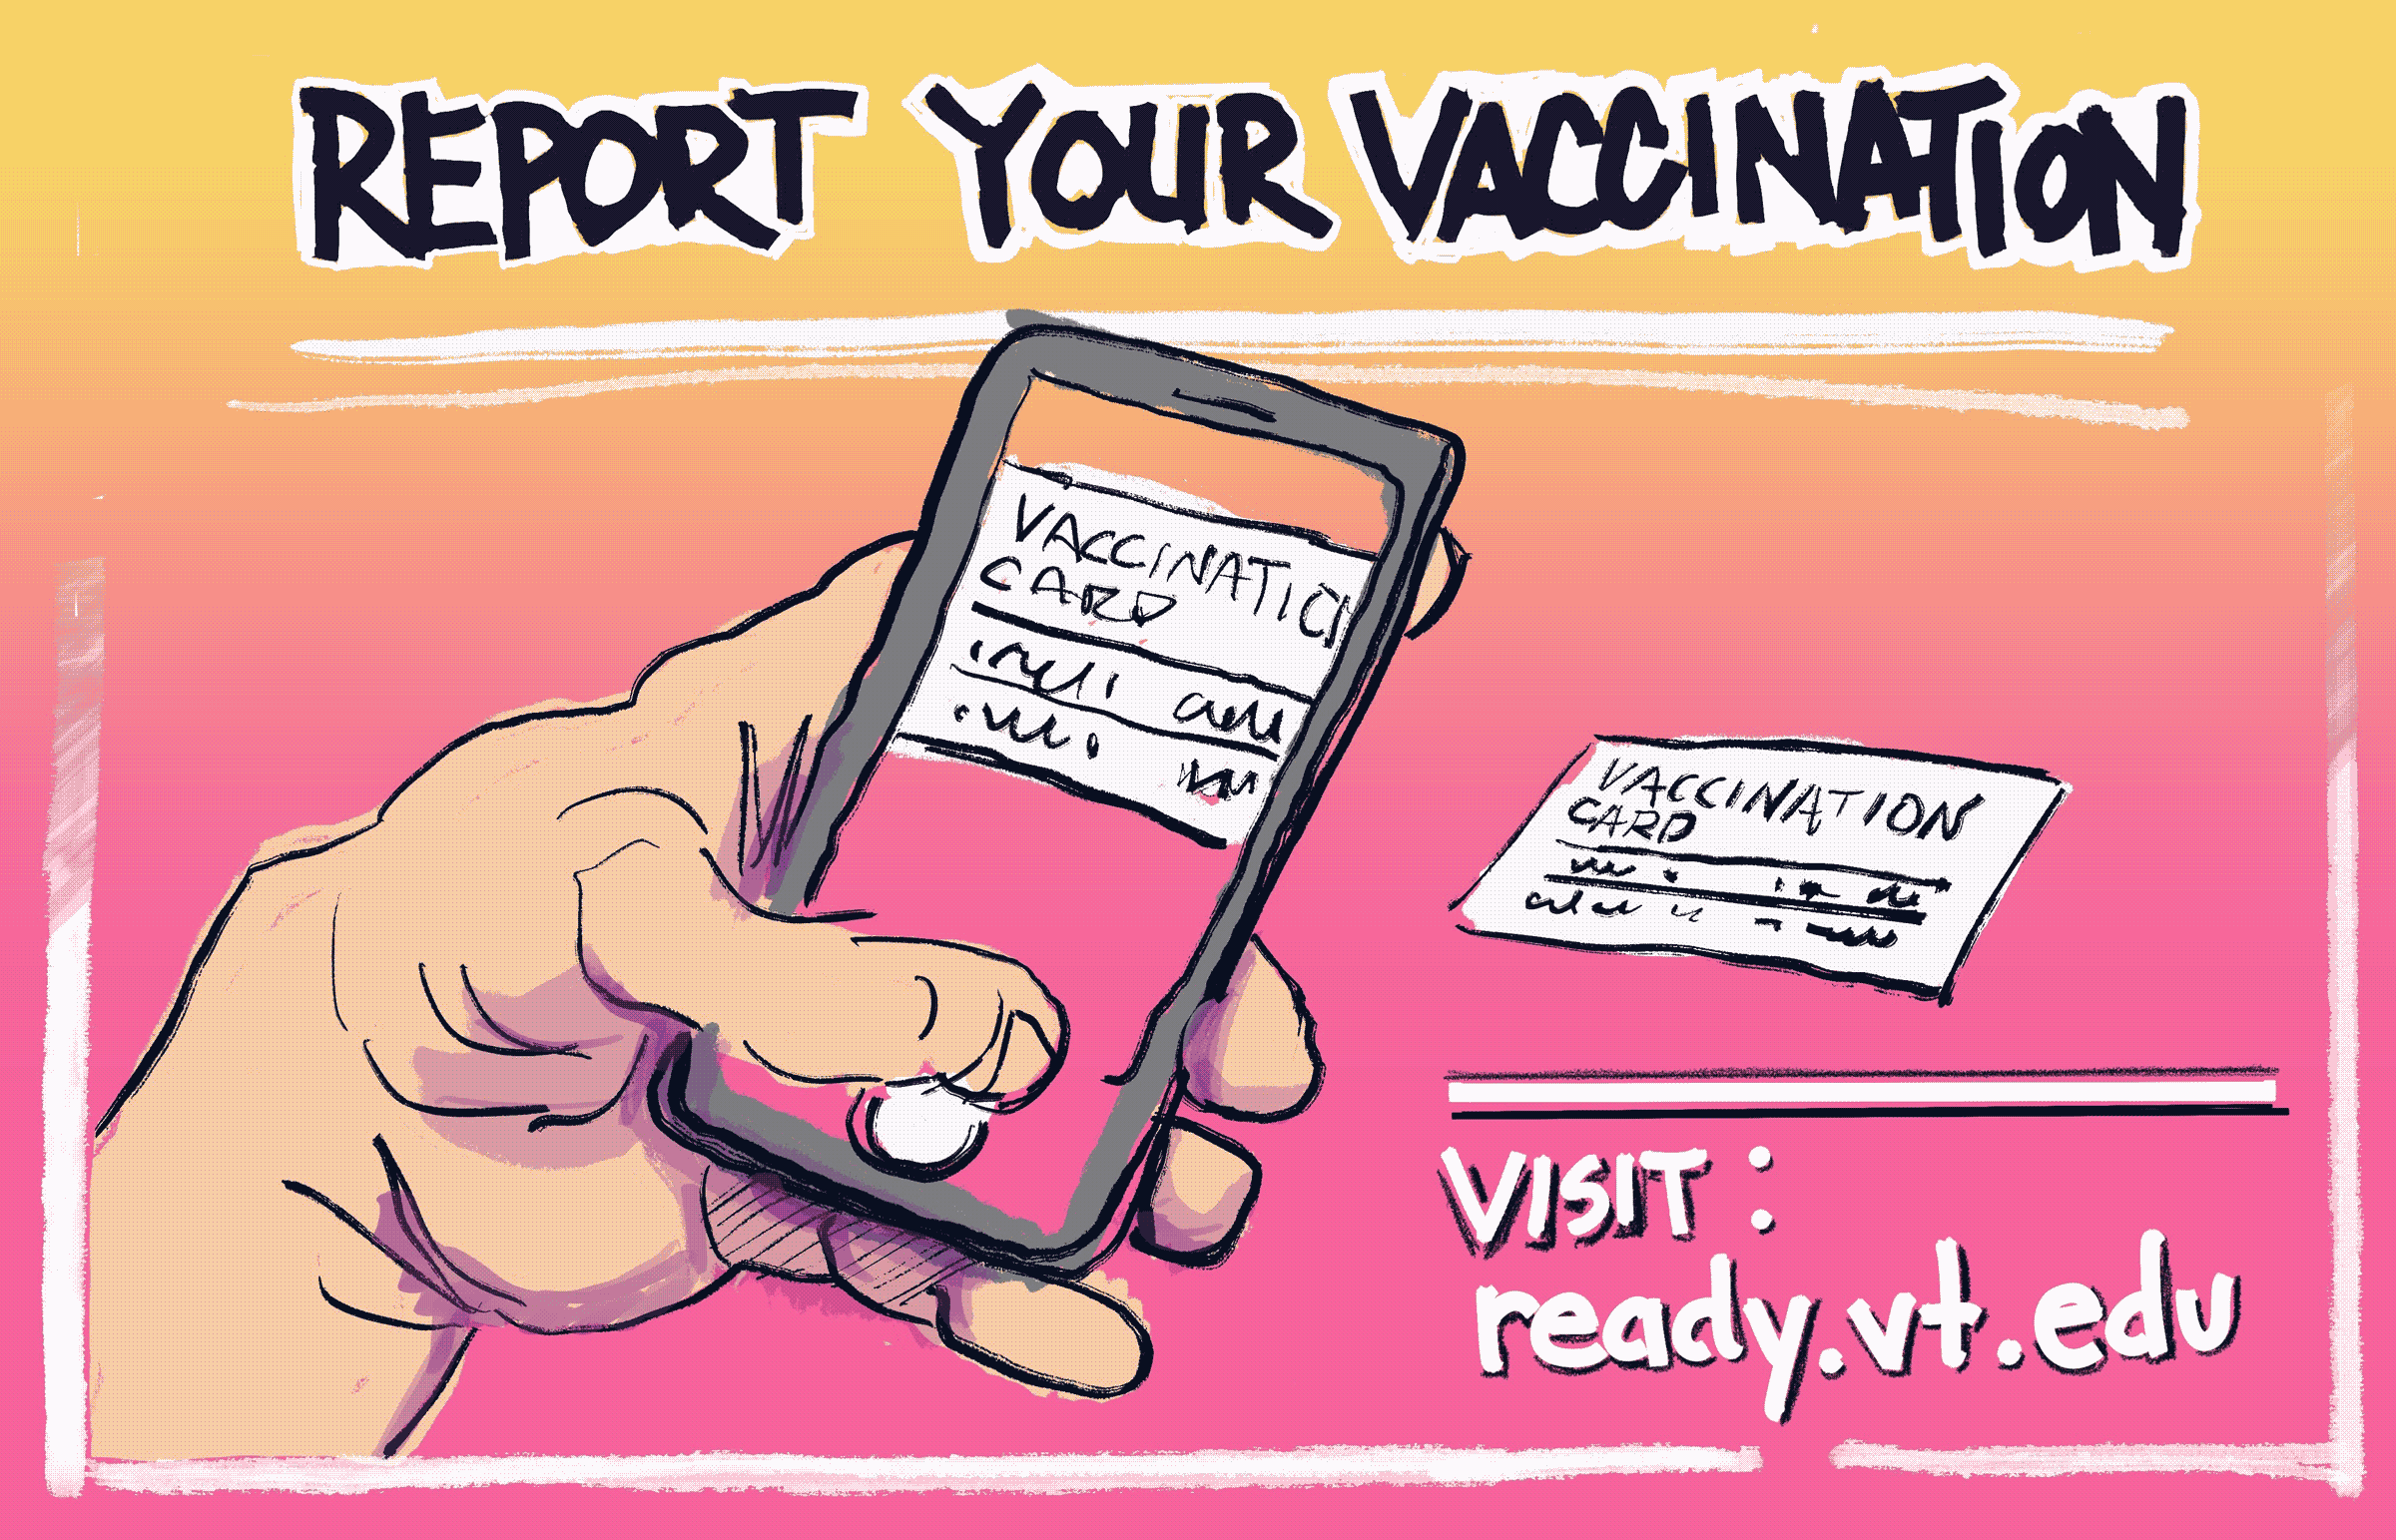 Animation of a phone that says "Report your vaccination visit ready dot vt dot edu"